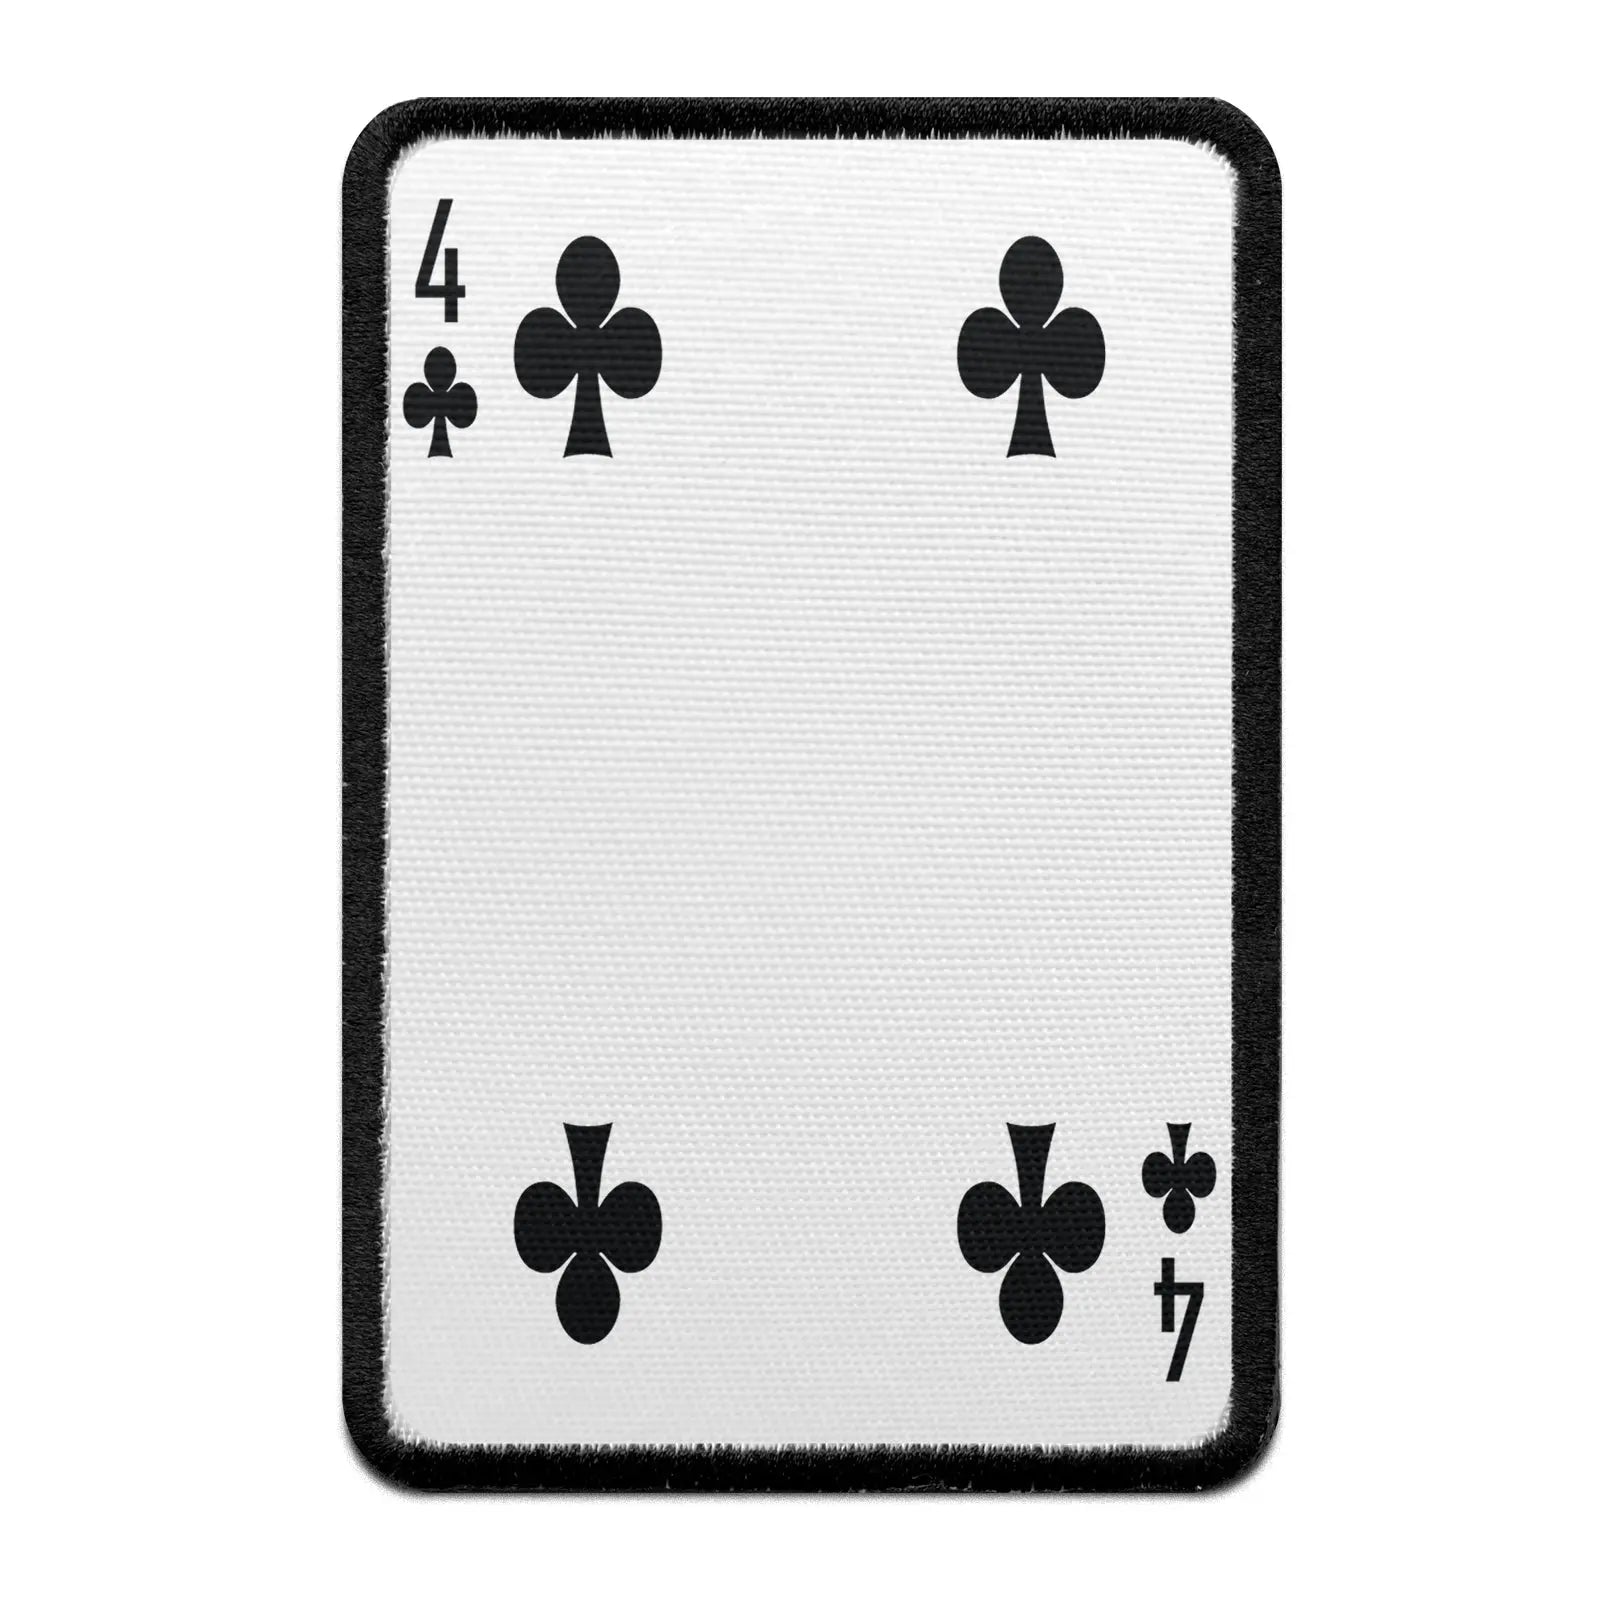 Four Of Clubs Card FotoPatch Game Deck Embroidered Iron On 